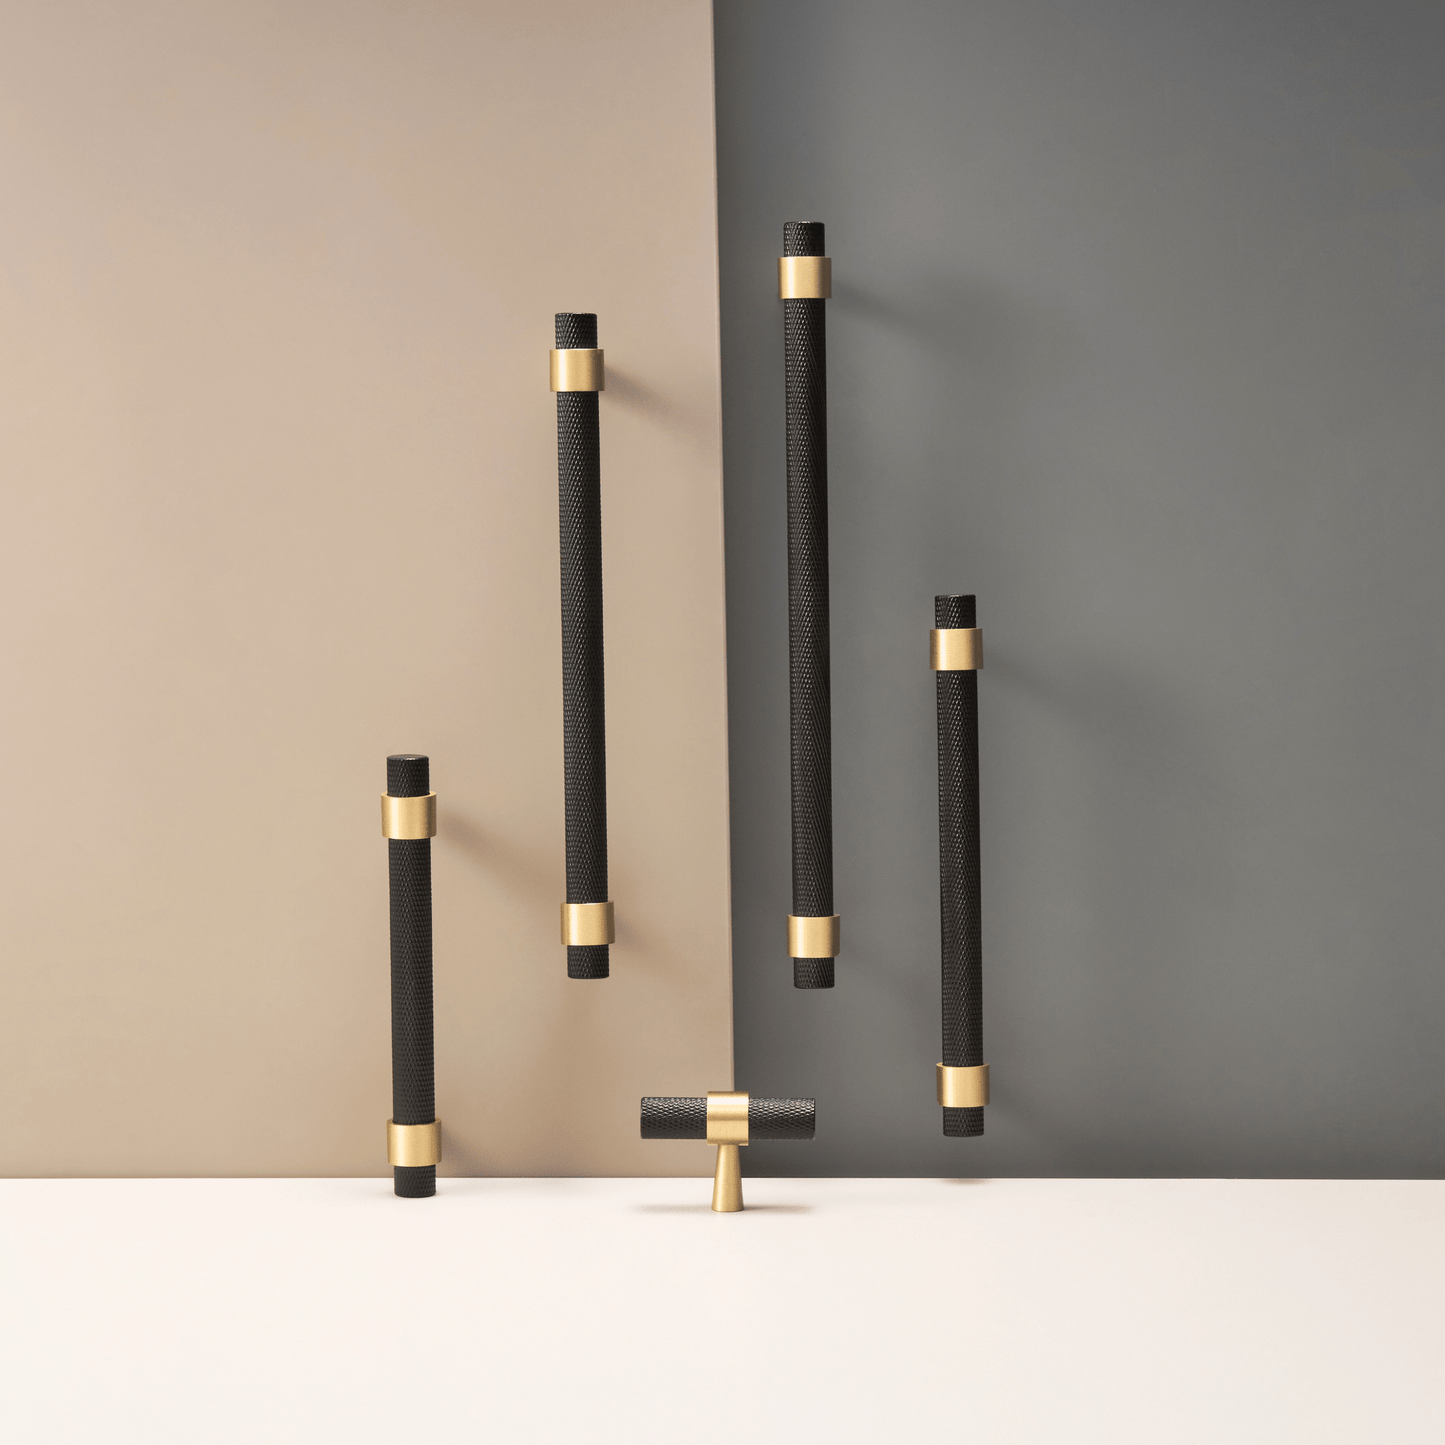 Cabinet Knobs & Handles Bayside Luxe - Mount Eliza Black and Satin Brass Knurled Handles